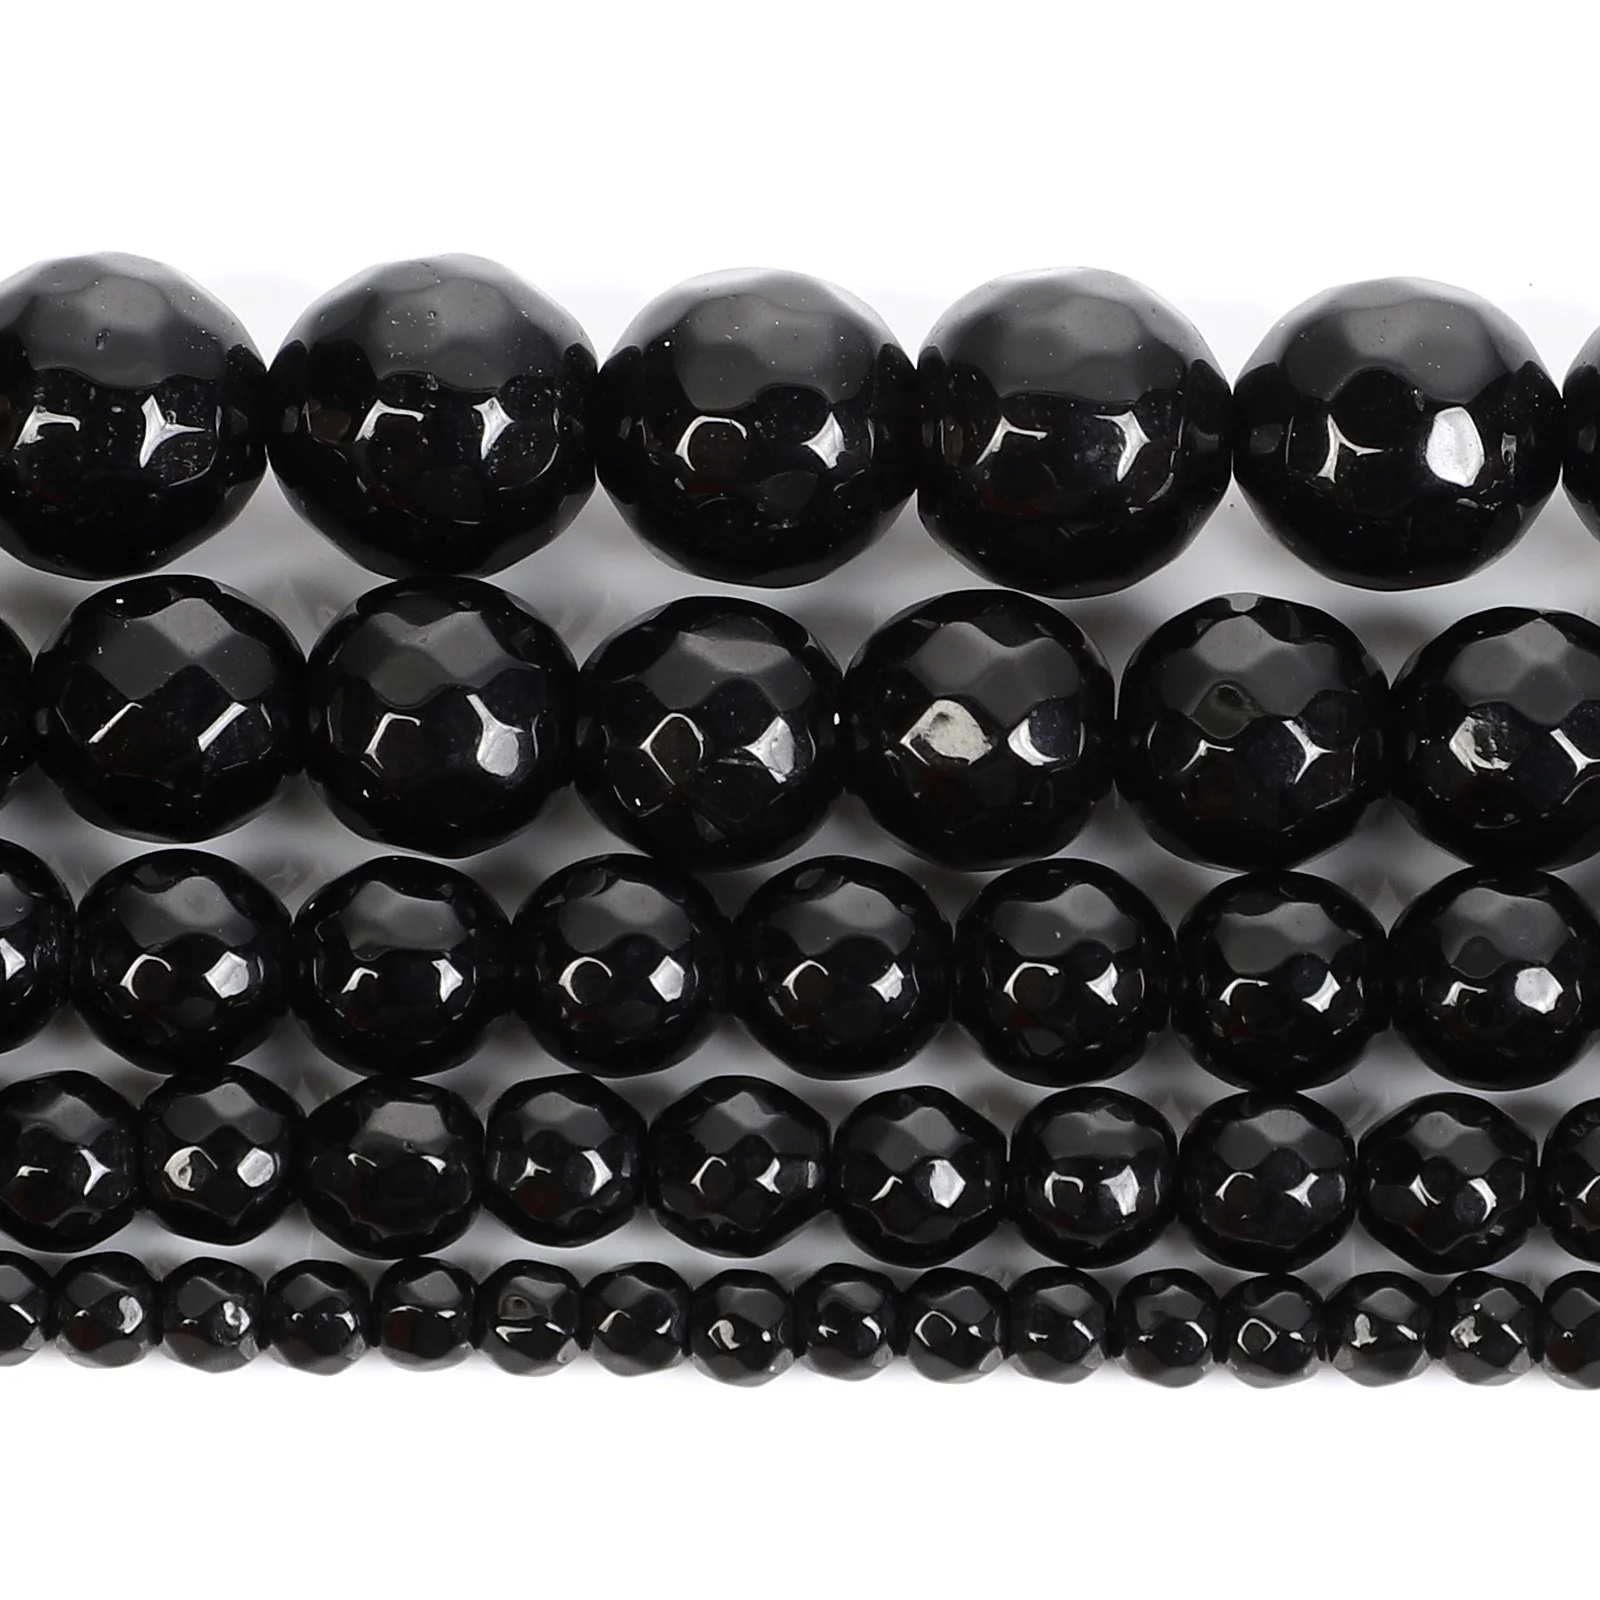 

4 6 8 10 12mm Round Faceted Black Agate Natural Stone Beads For Jewelry Making DIY Loose Spacer Beads Bracelet Necklace Handmade